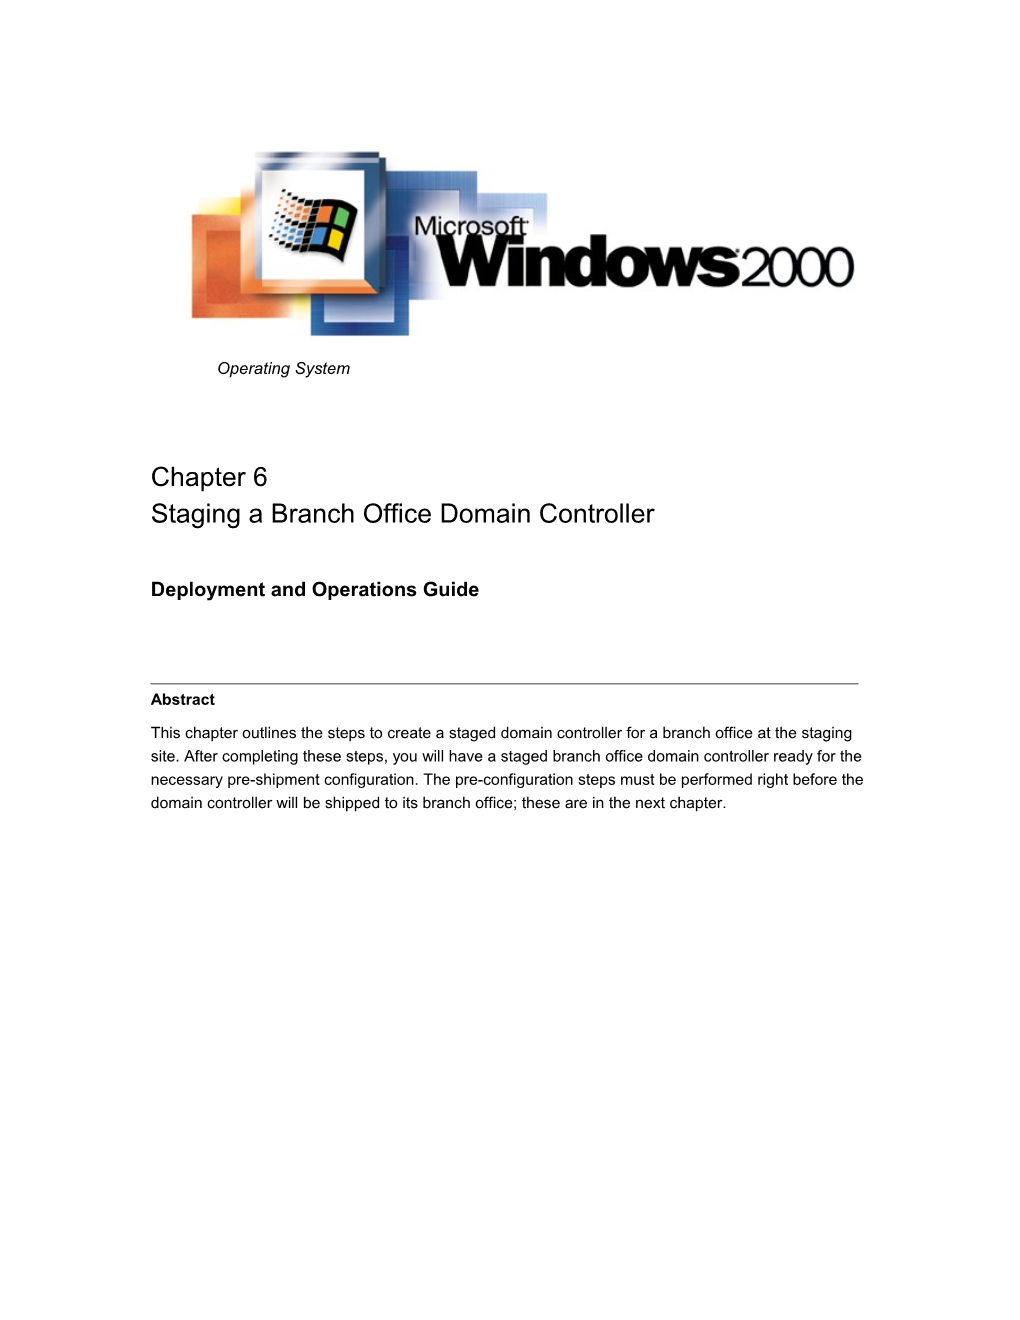 Staging a Branch Office Domain Controller